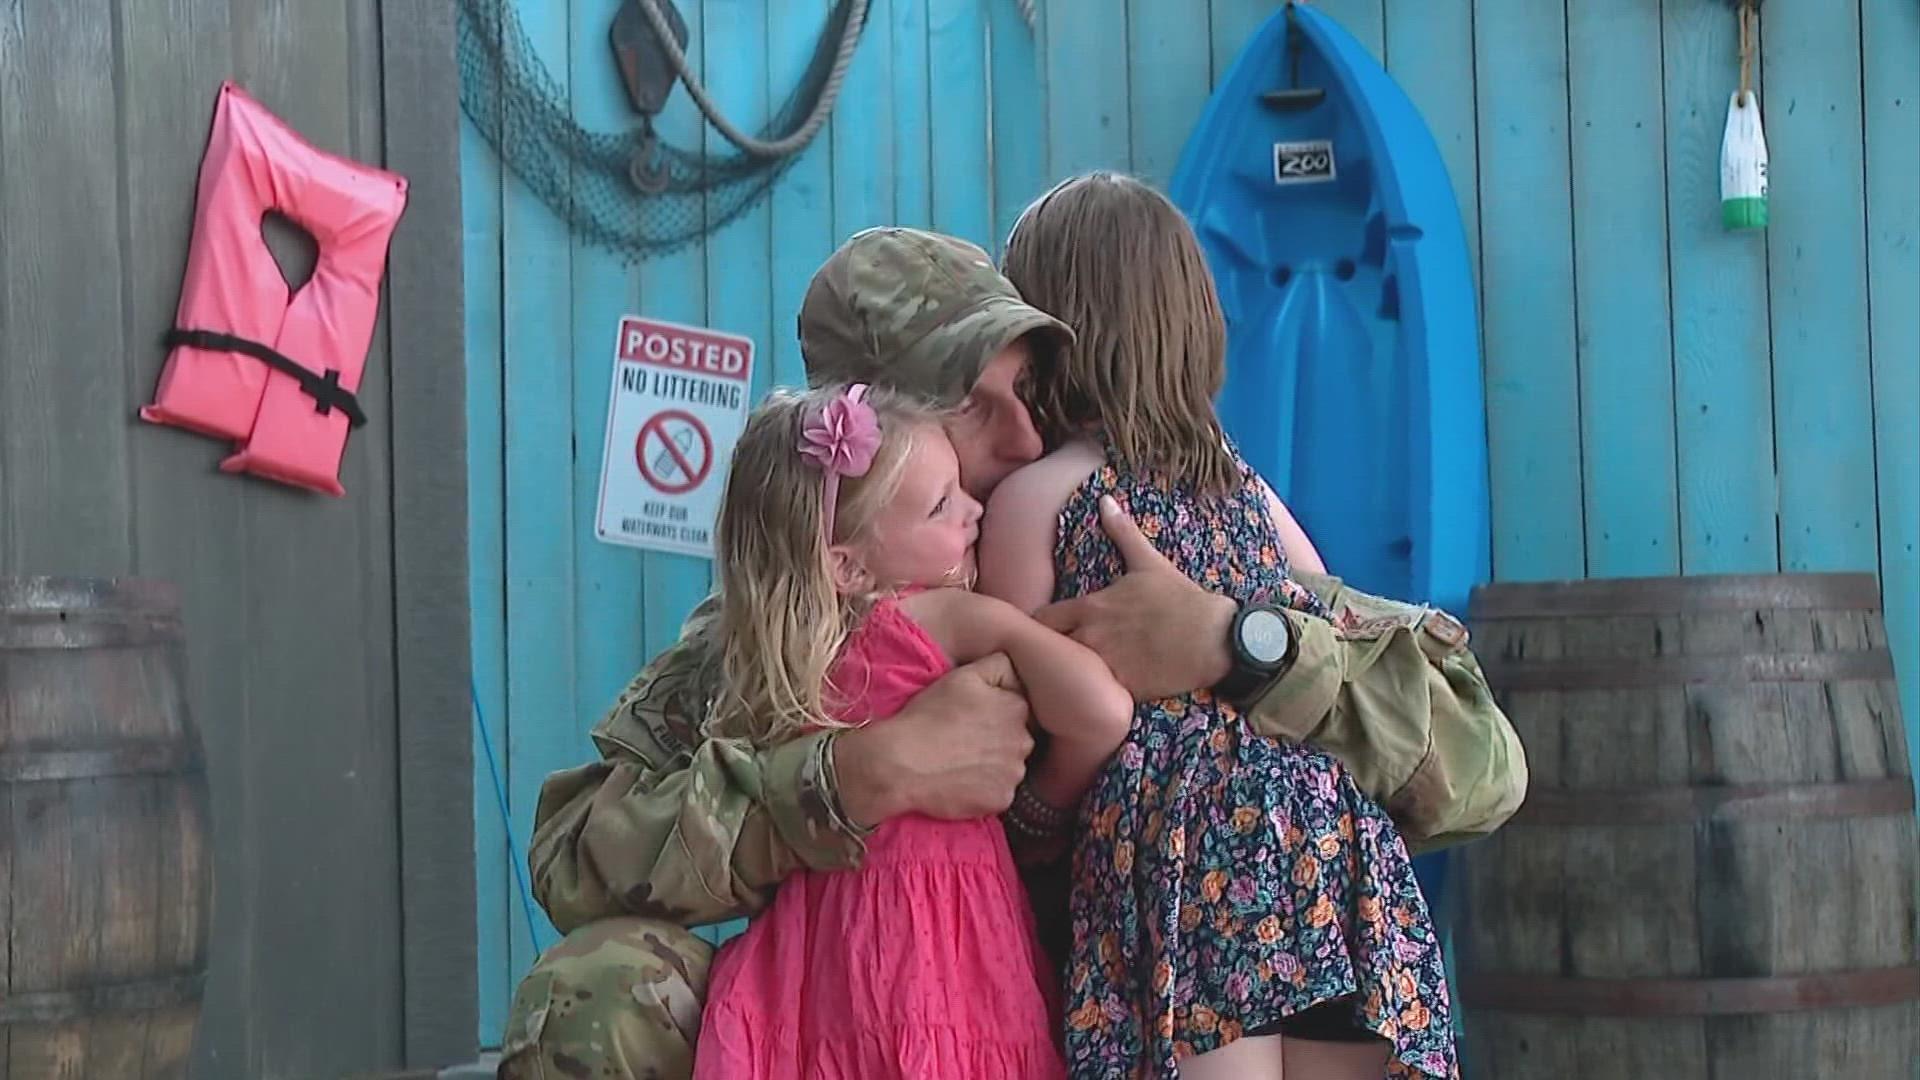 Kristina Murdock worked with the Columbus Zoo to surprise her two daughters after their dad just got back from serving overseas.